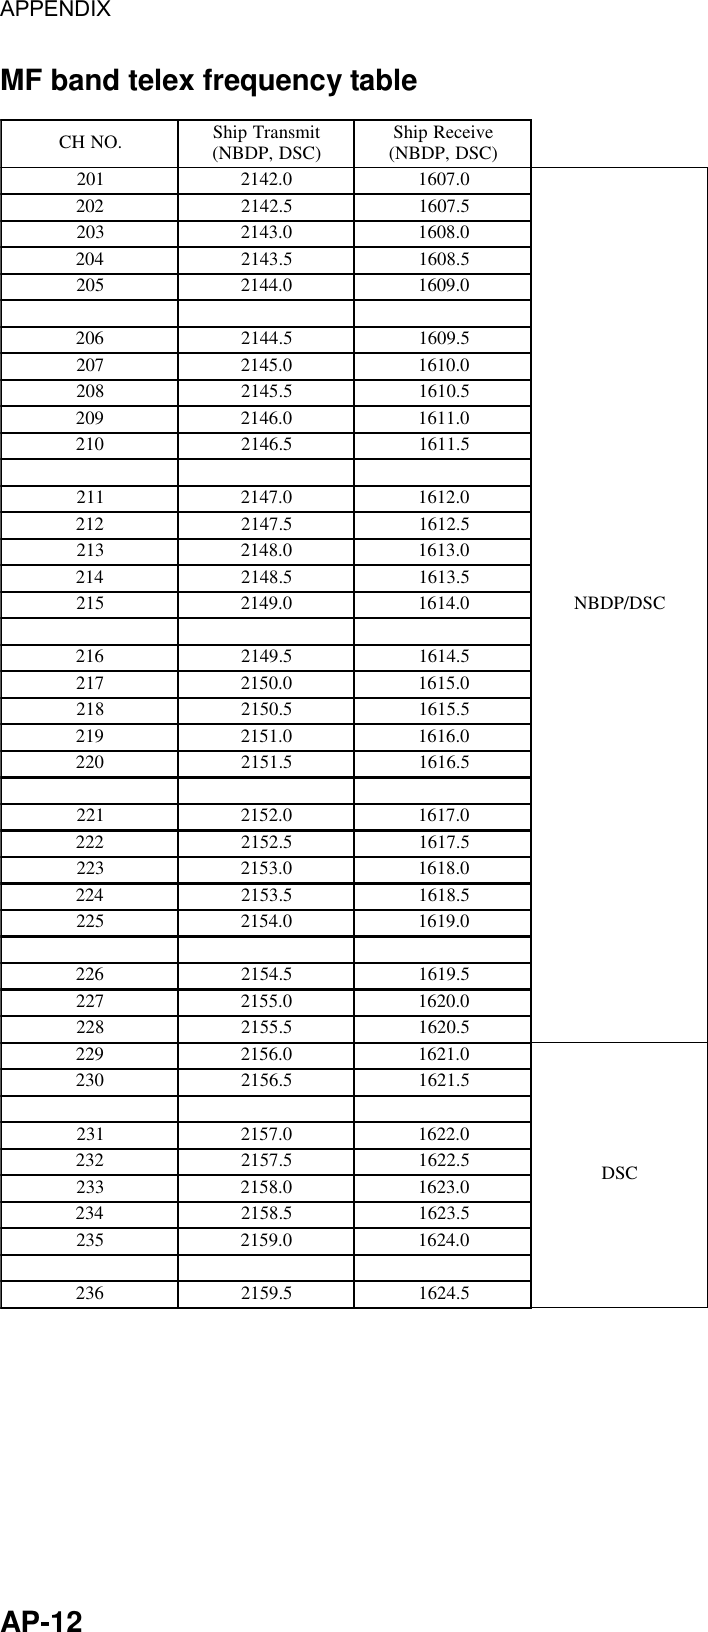 APPENDIX  AP-12 MF band telex frequency table .ONHC timsnarTpihS )CSD,PDBN( evieceRpihS )CSD,PDBN(1020.24120.7061CSD/PDBN2025.24125.70613020.34120.80614025.34125.80615020.44120.90616025.44125.90617020.54120.01618025.54125.01619020.64120.11610125.64125.11611120.74120.21612125.74125.21613120.84120.31614125.84125.31615120.94120.41616125.94125.41617120.05120.51618125.05125.51619120.15120.61610225.15125.61611220.25120.71612225.25125.71613220.35120.81614225.35125.81615220.45120.91616225.45125.91617220.55120.02618225.55125.02619220.65120.1261CSD0325.65125.12611320.75120.22612325.75125.22613320.85120.32614325.85125.32615320.95120.42616325.95125.4261 